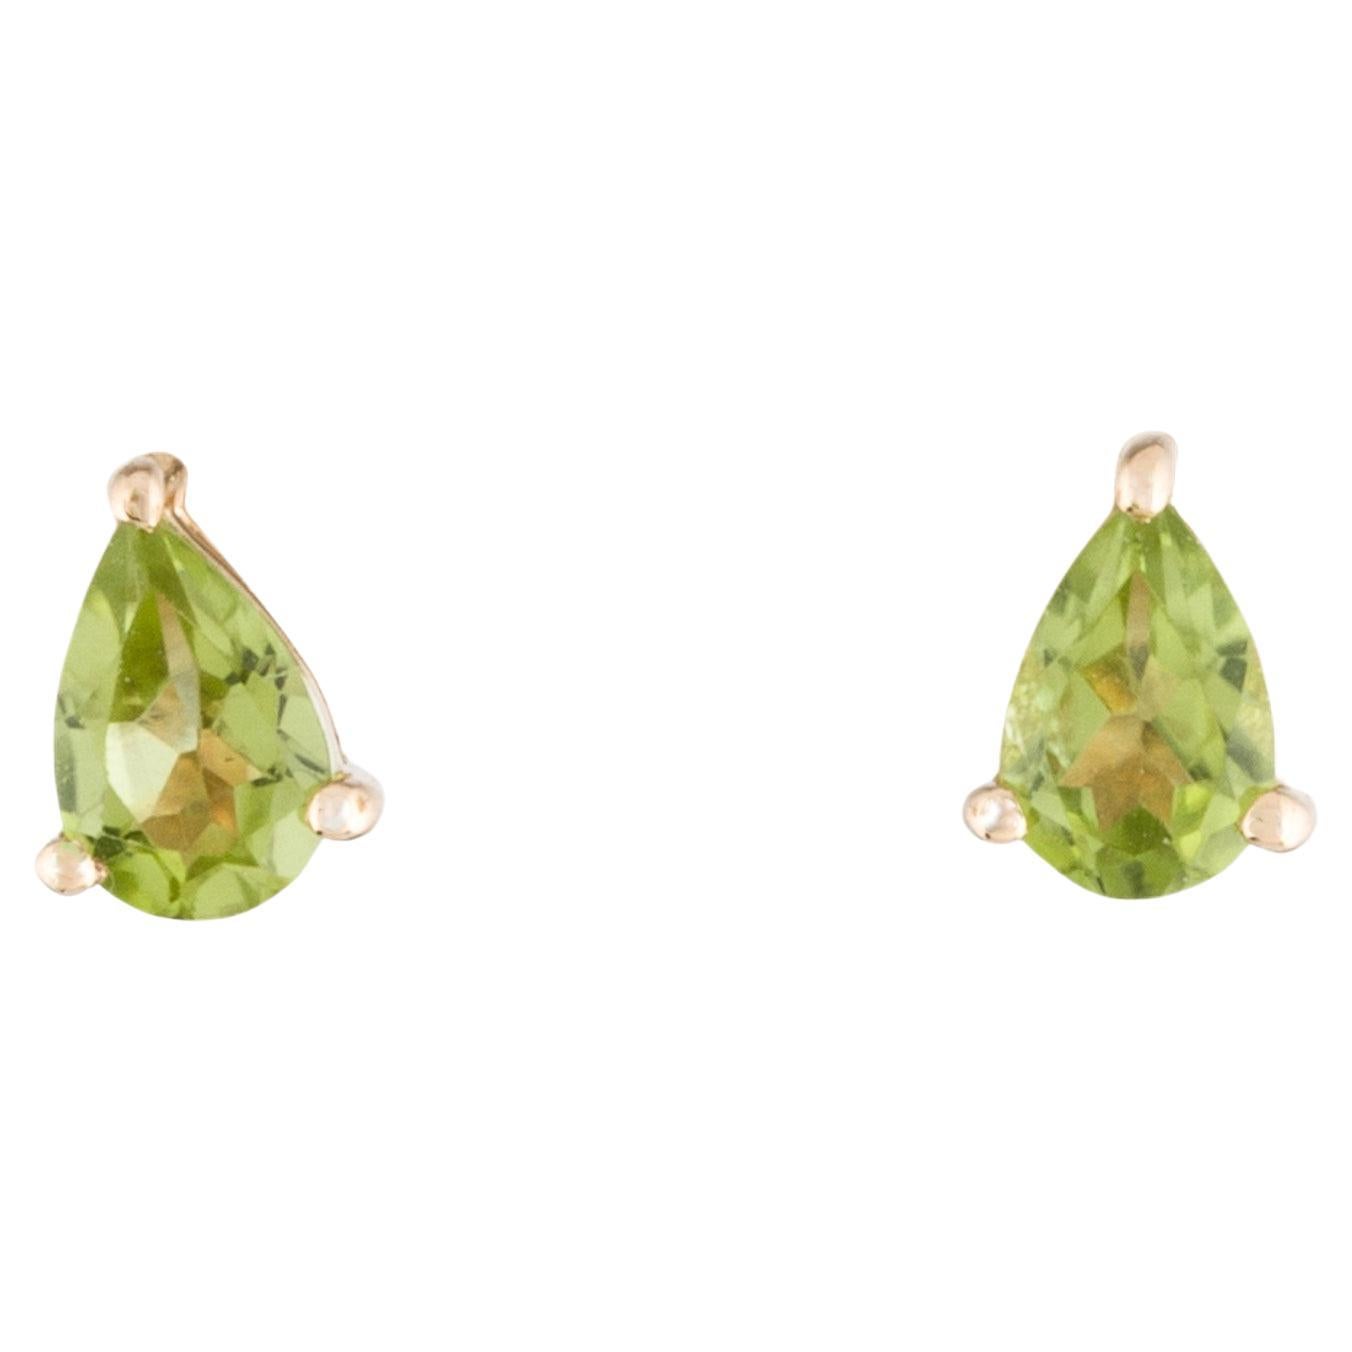 Vibrant 14K Yellow Gold Peridot Stud Earrings with Pear-Shaped Brilliant Cut For Sale